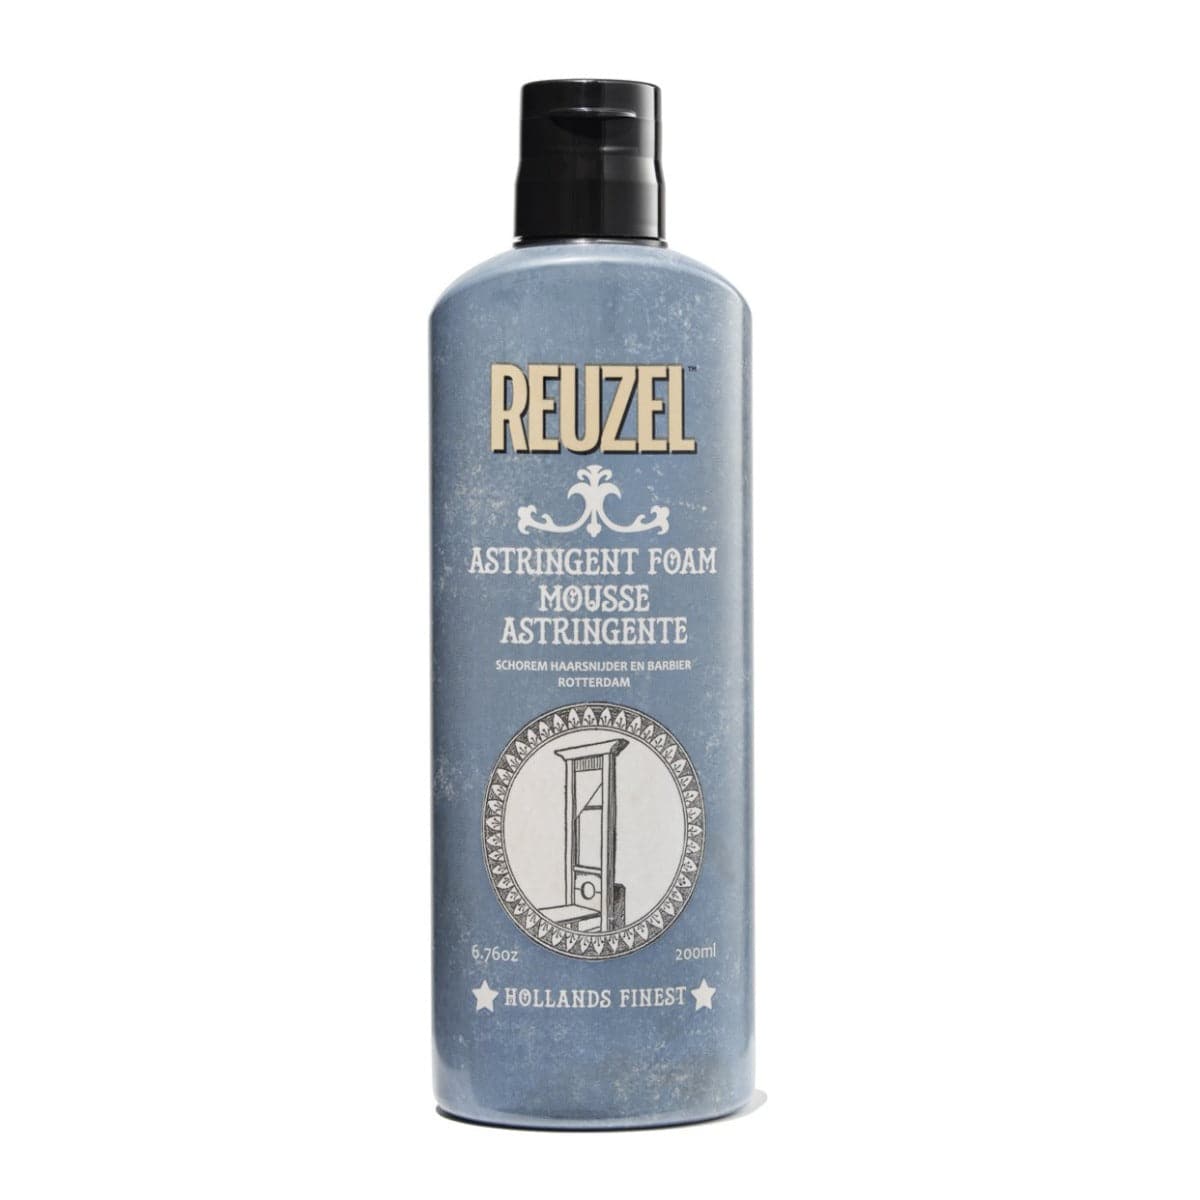 Astringent Foam - Witch hazel soothes tender skin post-shave, combines T4 Tonic Blend with aloe vera, Conditions pores to keep you clear and balanced.